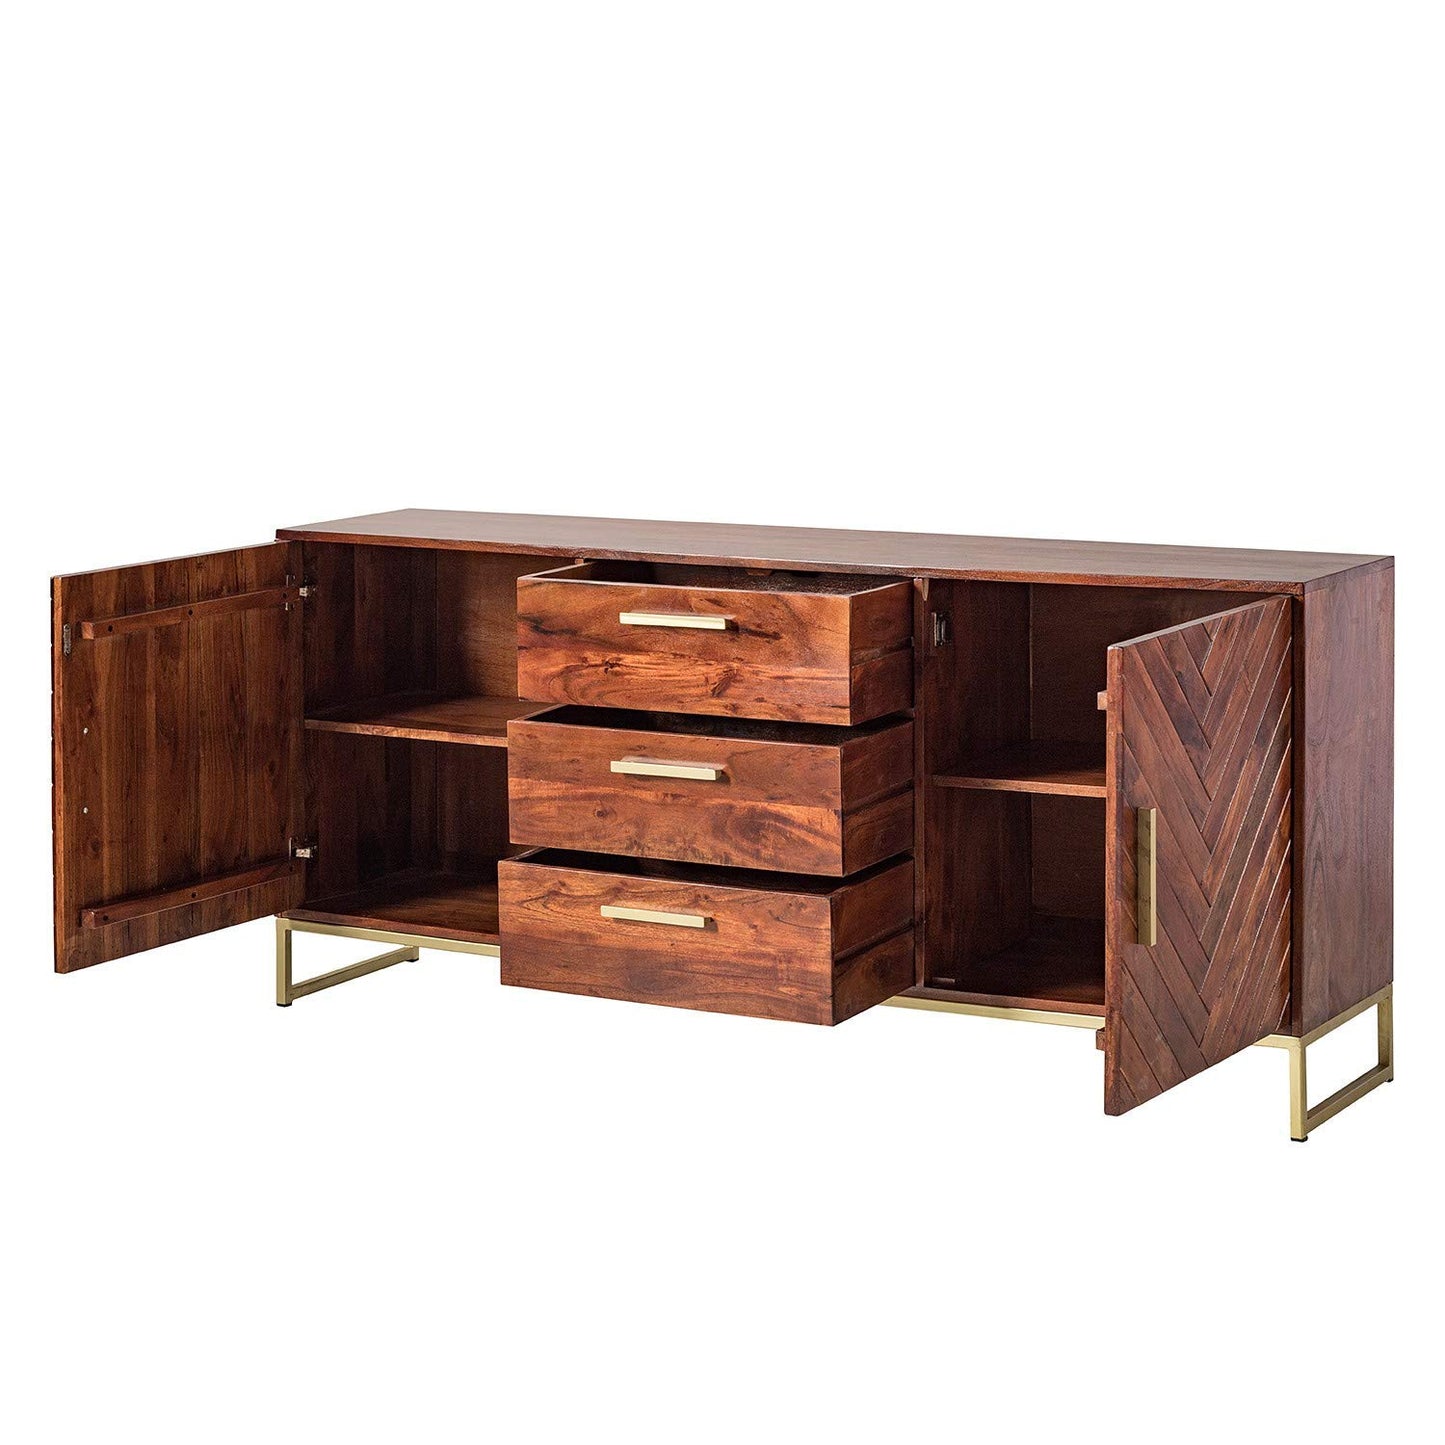 Sideboard with two doors and three drawers made of solid acacia wood